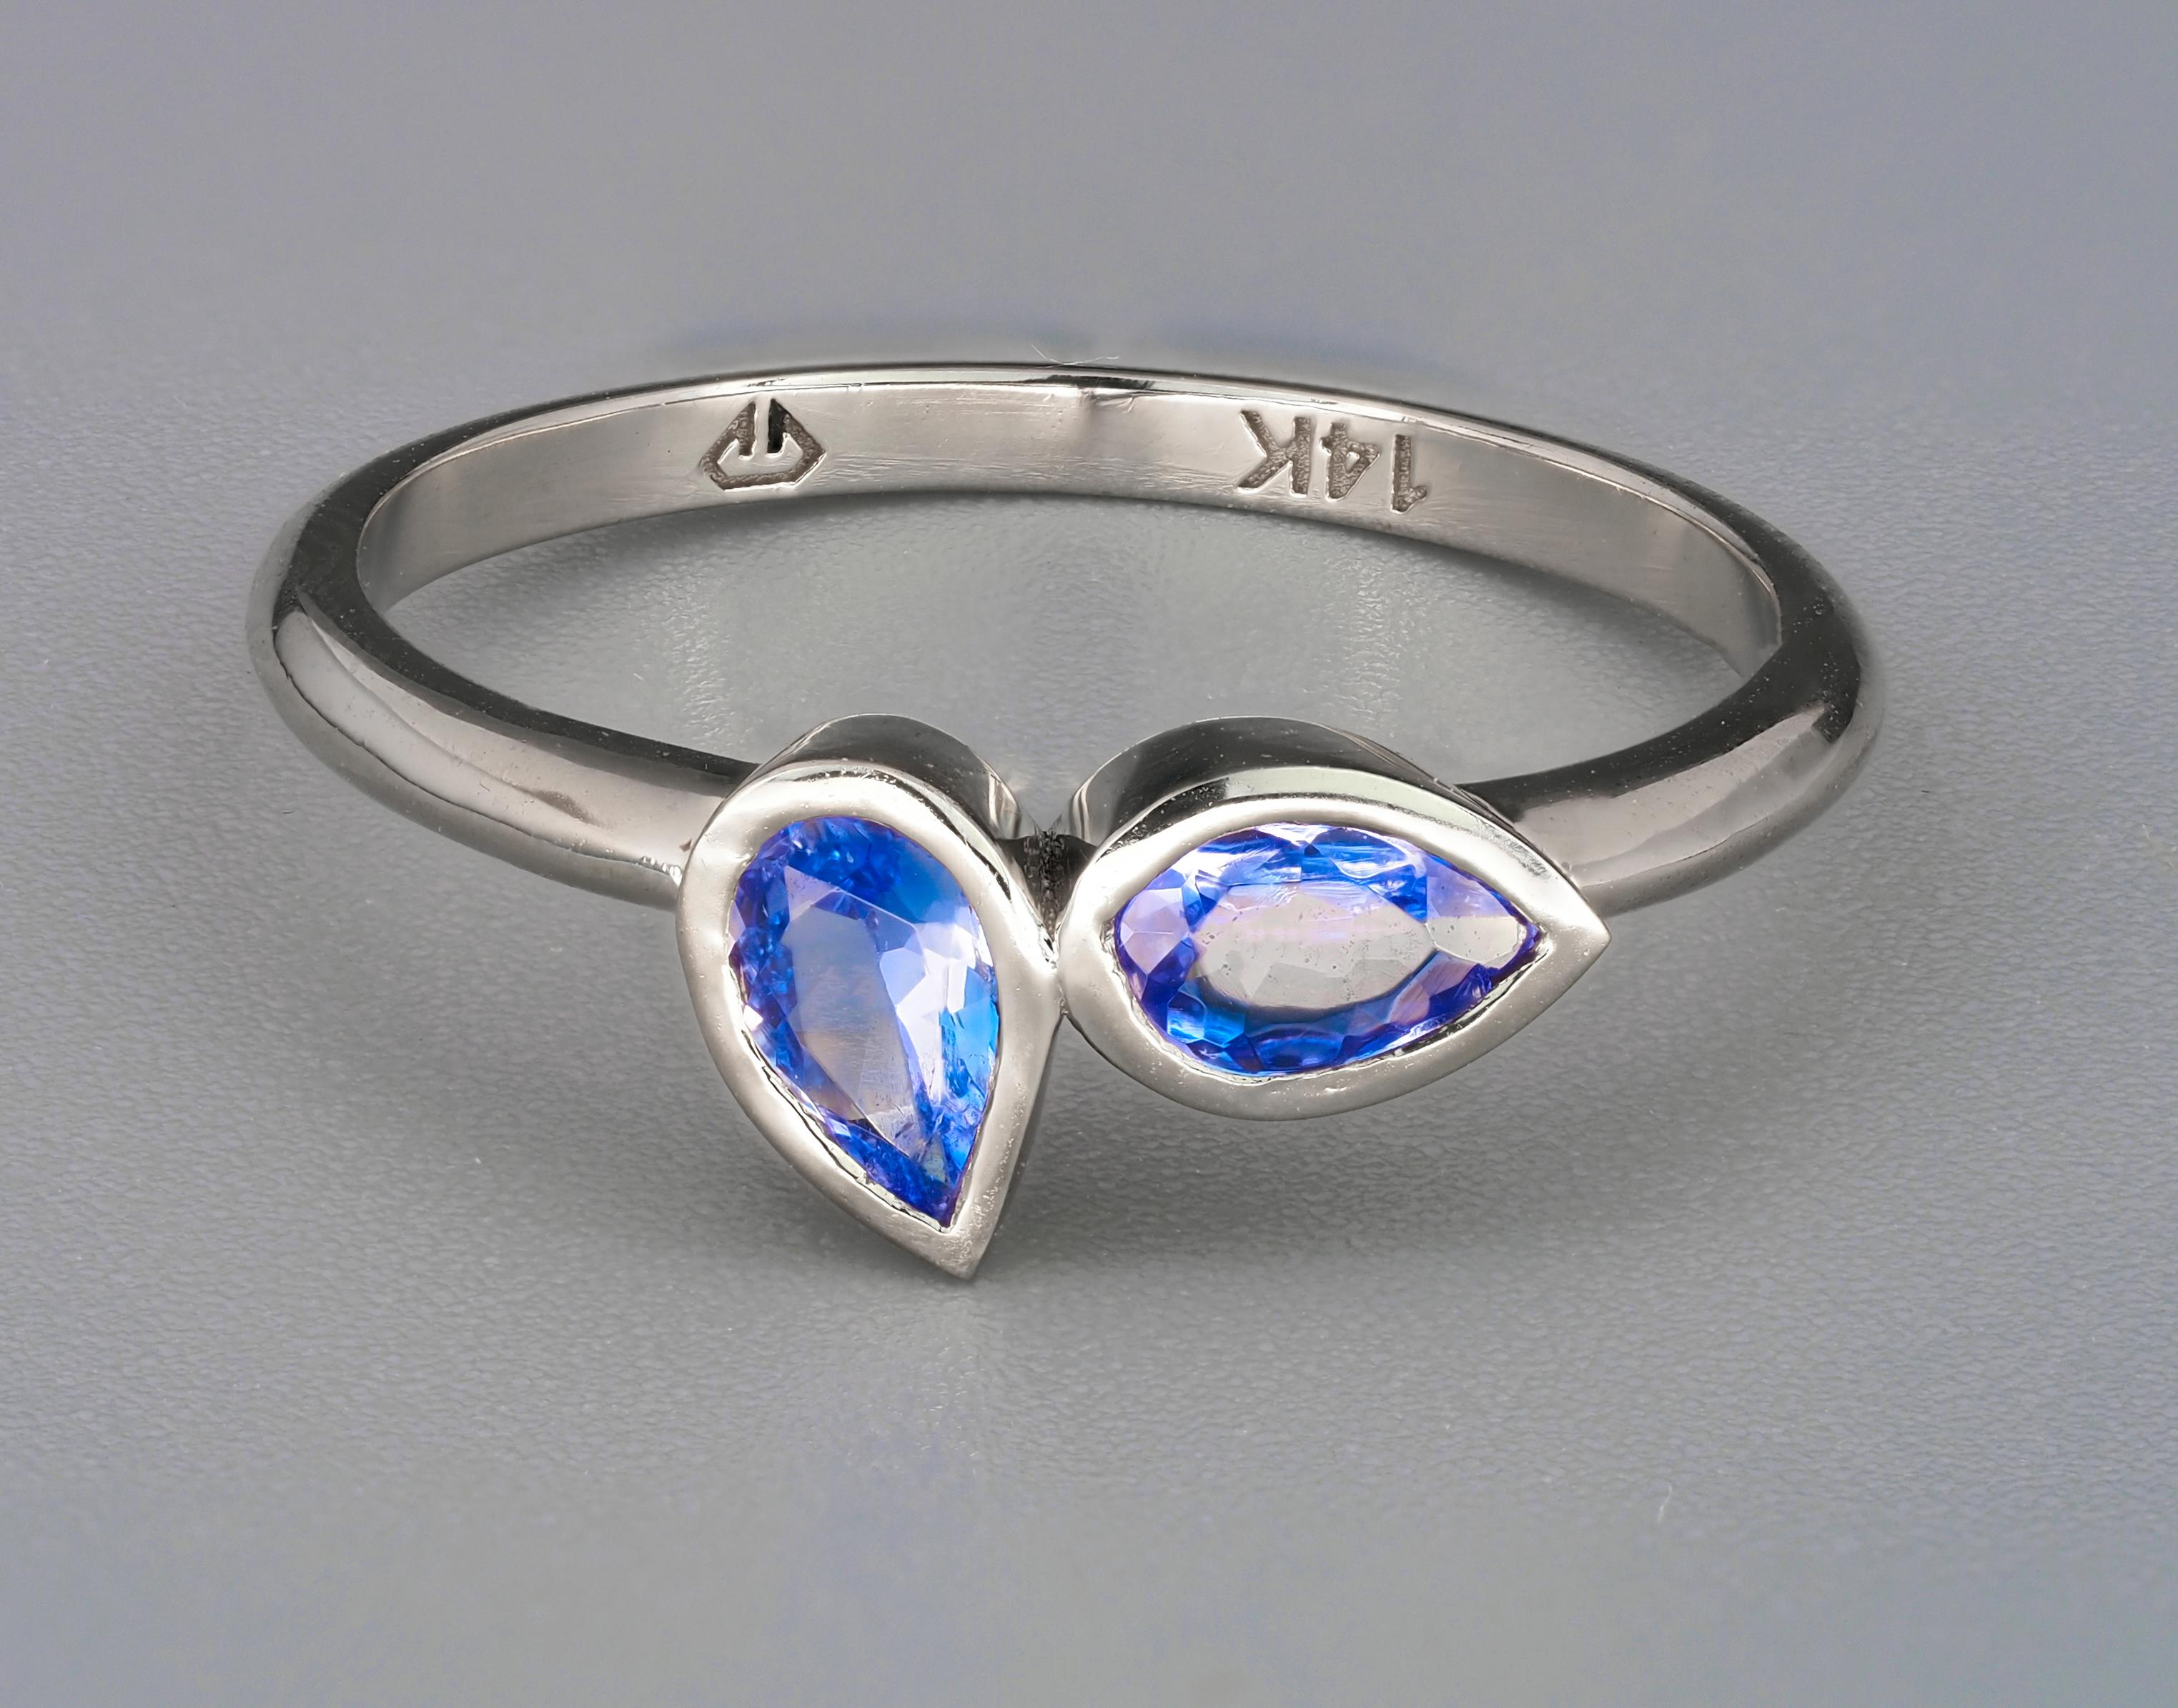 Pear Tanzanite 14k gold ring. 
2 tanzanite ring. Tanzanite minimalist ring. Tanzanite delicate ring. Bezel set tanzanite ring.

Weight: 1.85 g. depends from size
Metal: 14k gold

Central stones: 2 pieces tanzanites
Cut: pears
Weight: aprx 0.95 ct.